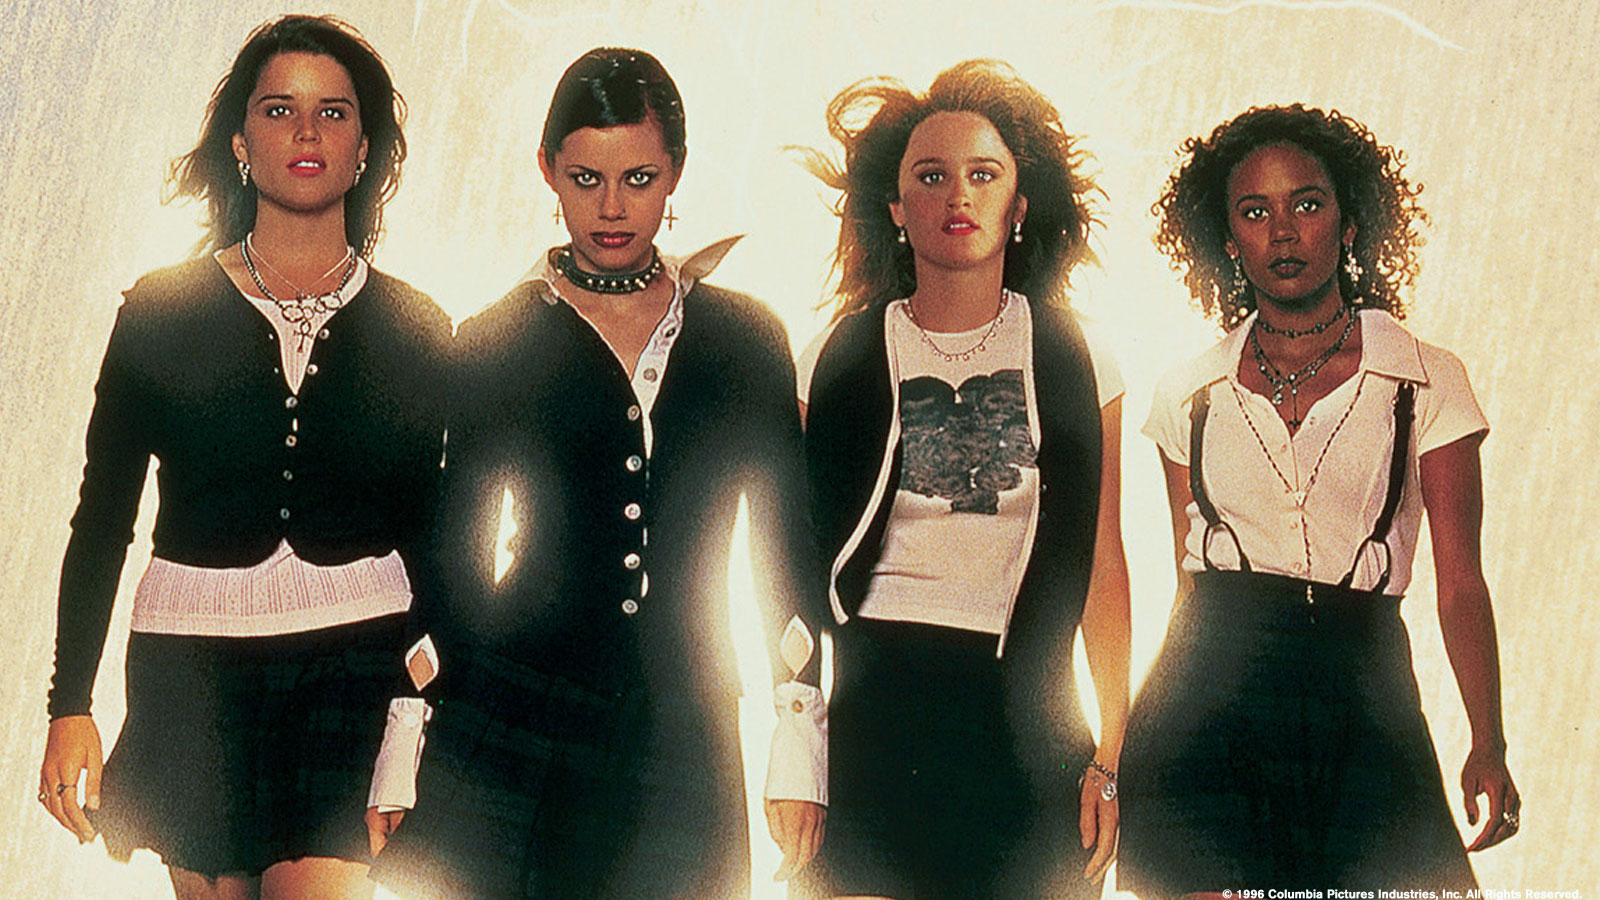 The Craft Picture - Image Abyss